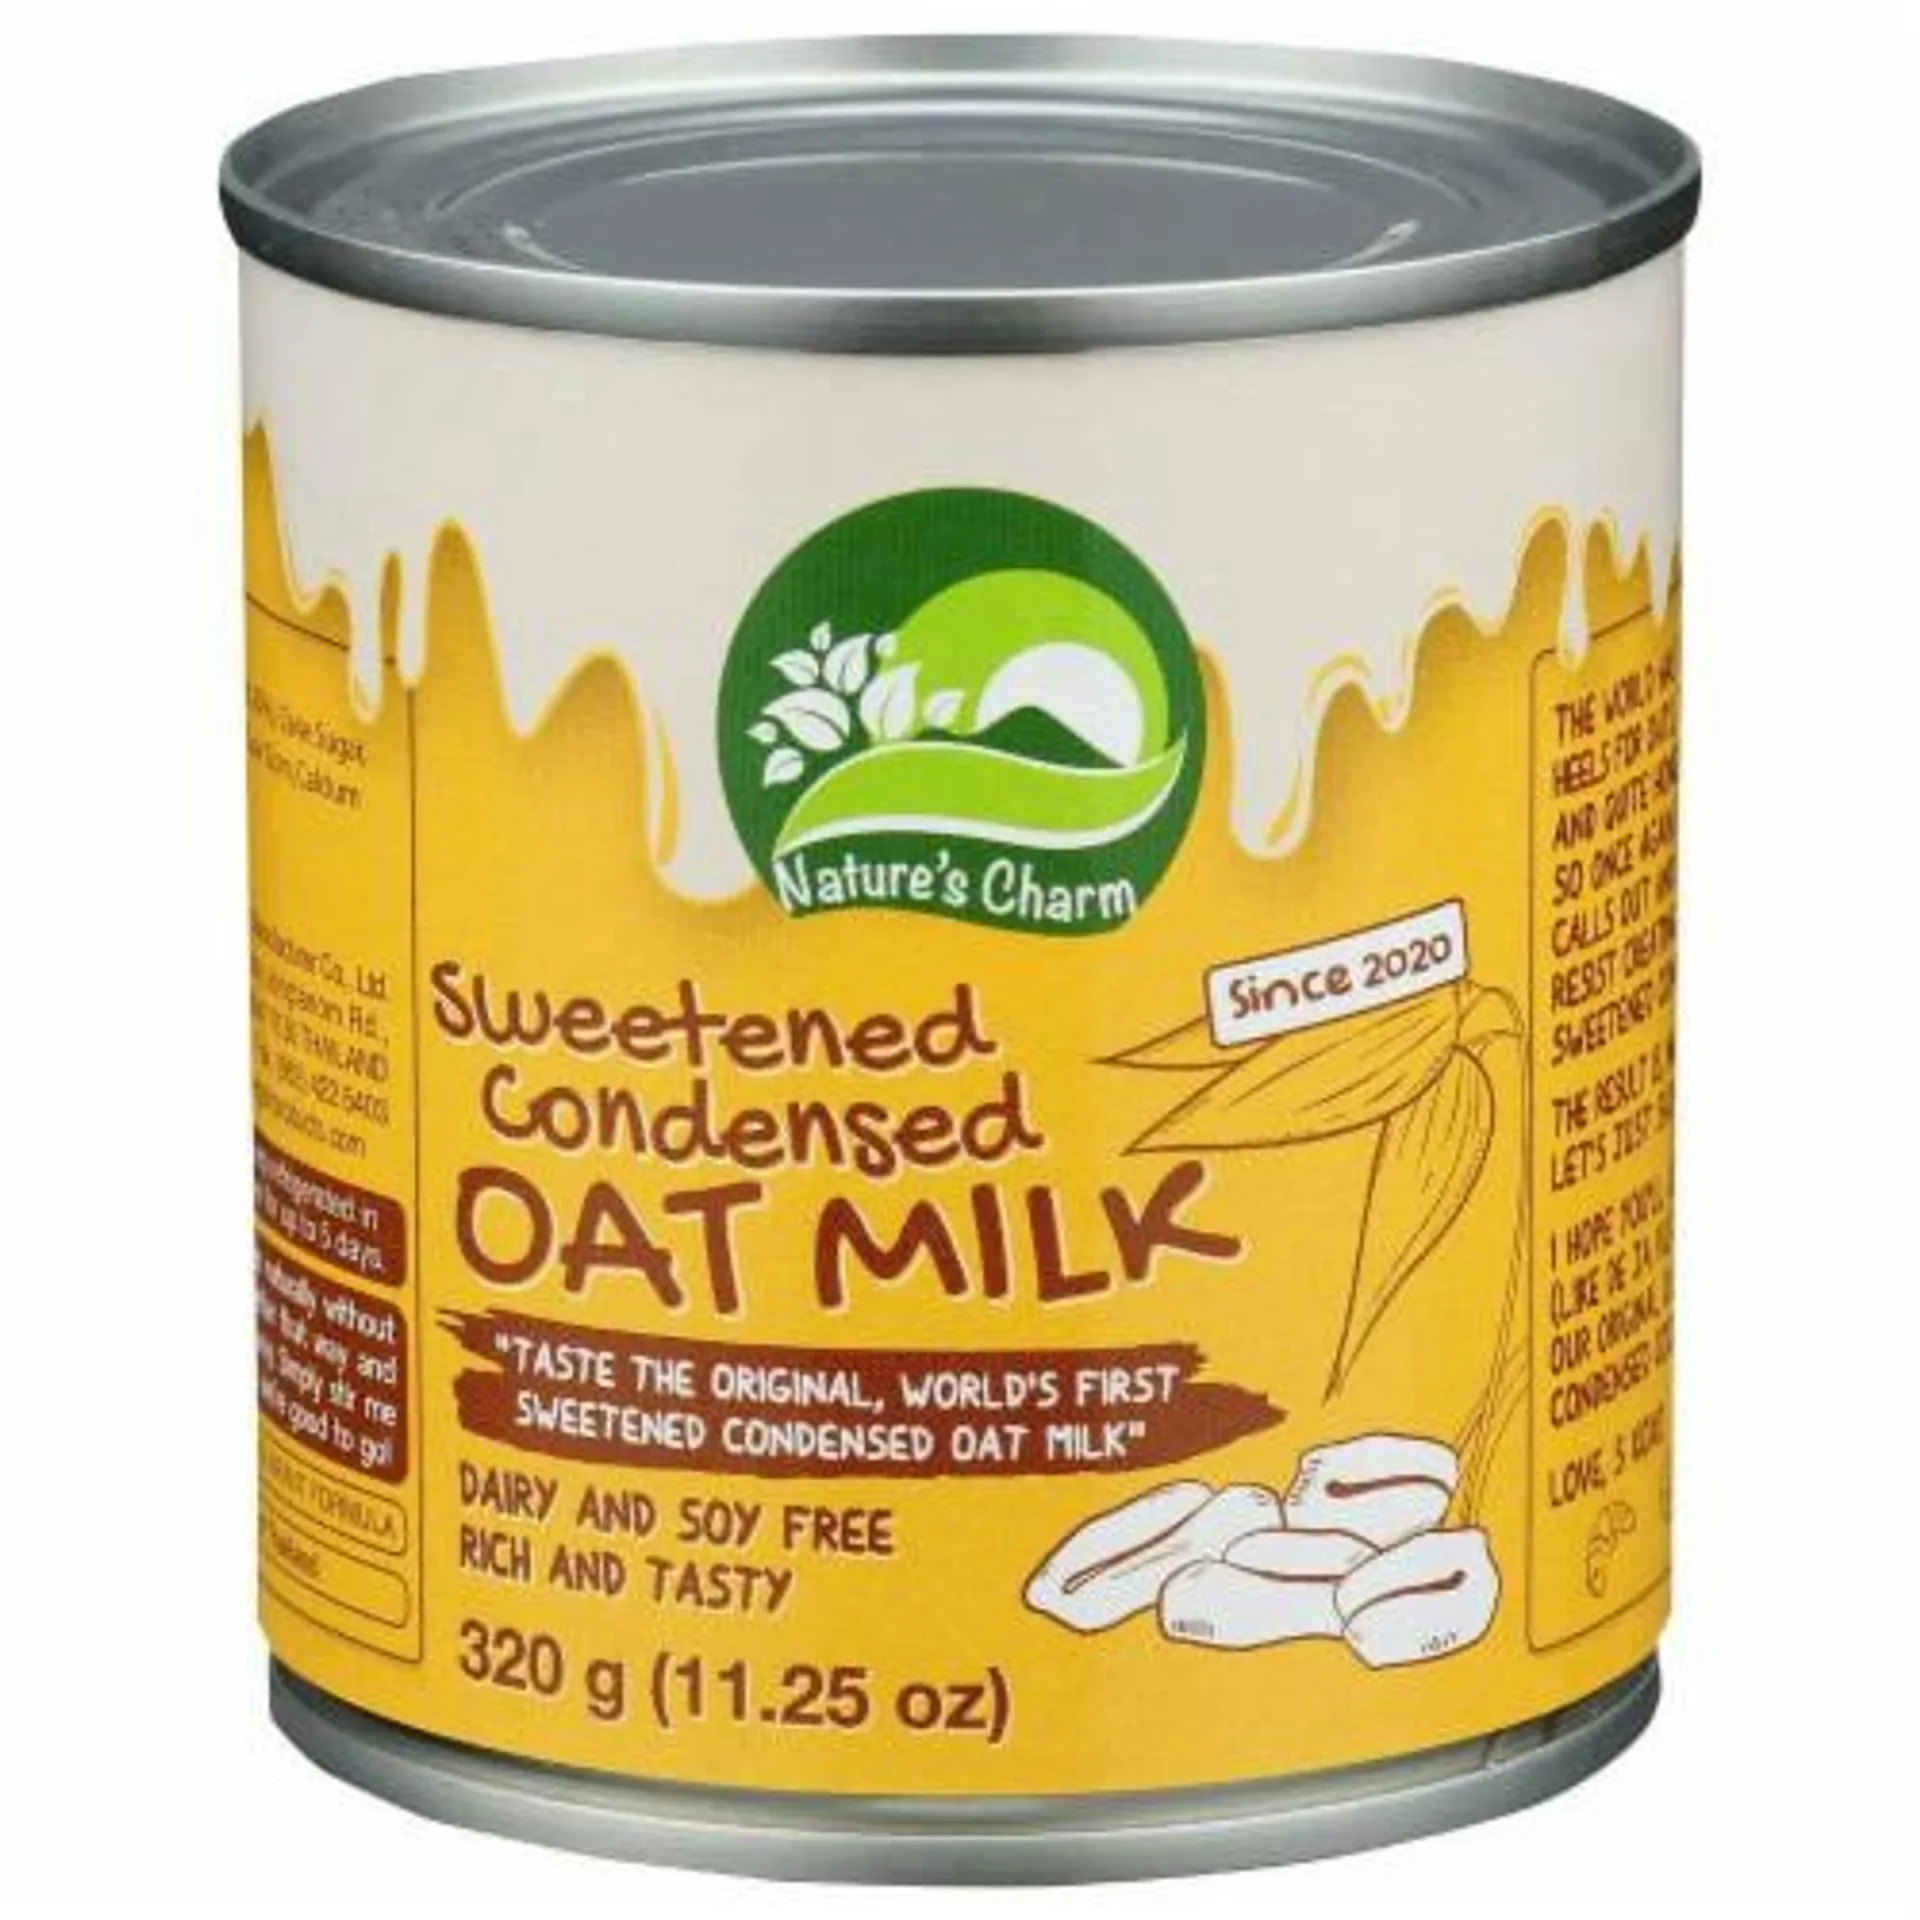 Natures Charm Sweetened Condensed Oat Milk - 11.25 Fluid Ounce (Pack of 6)